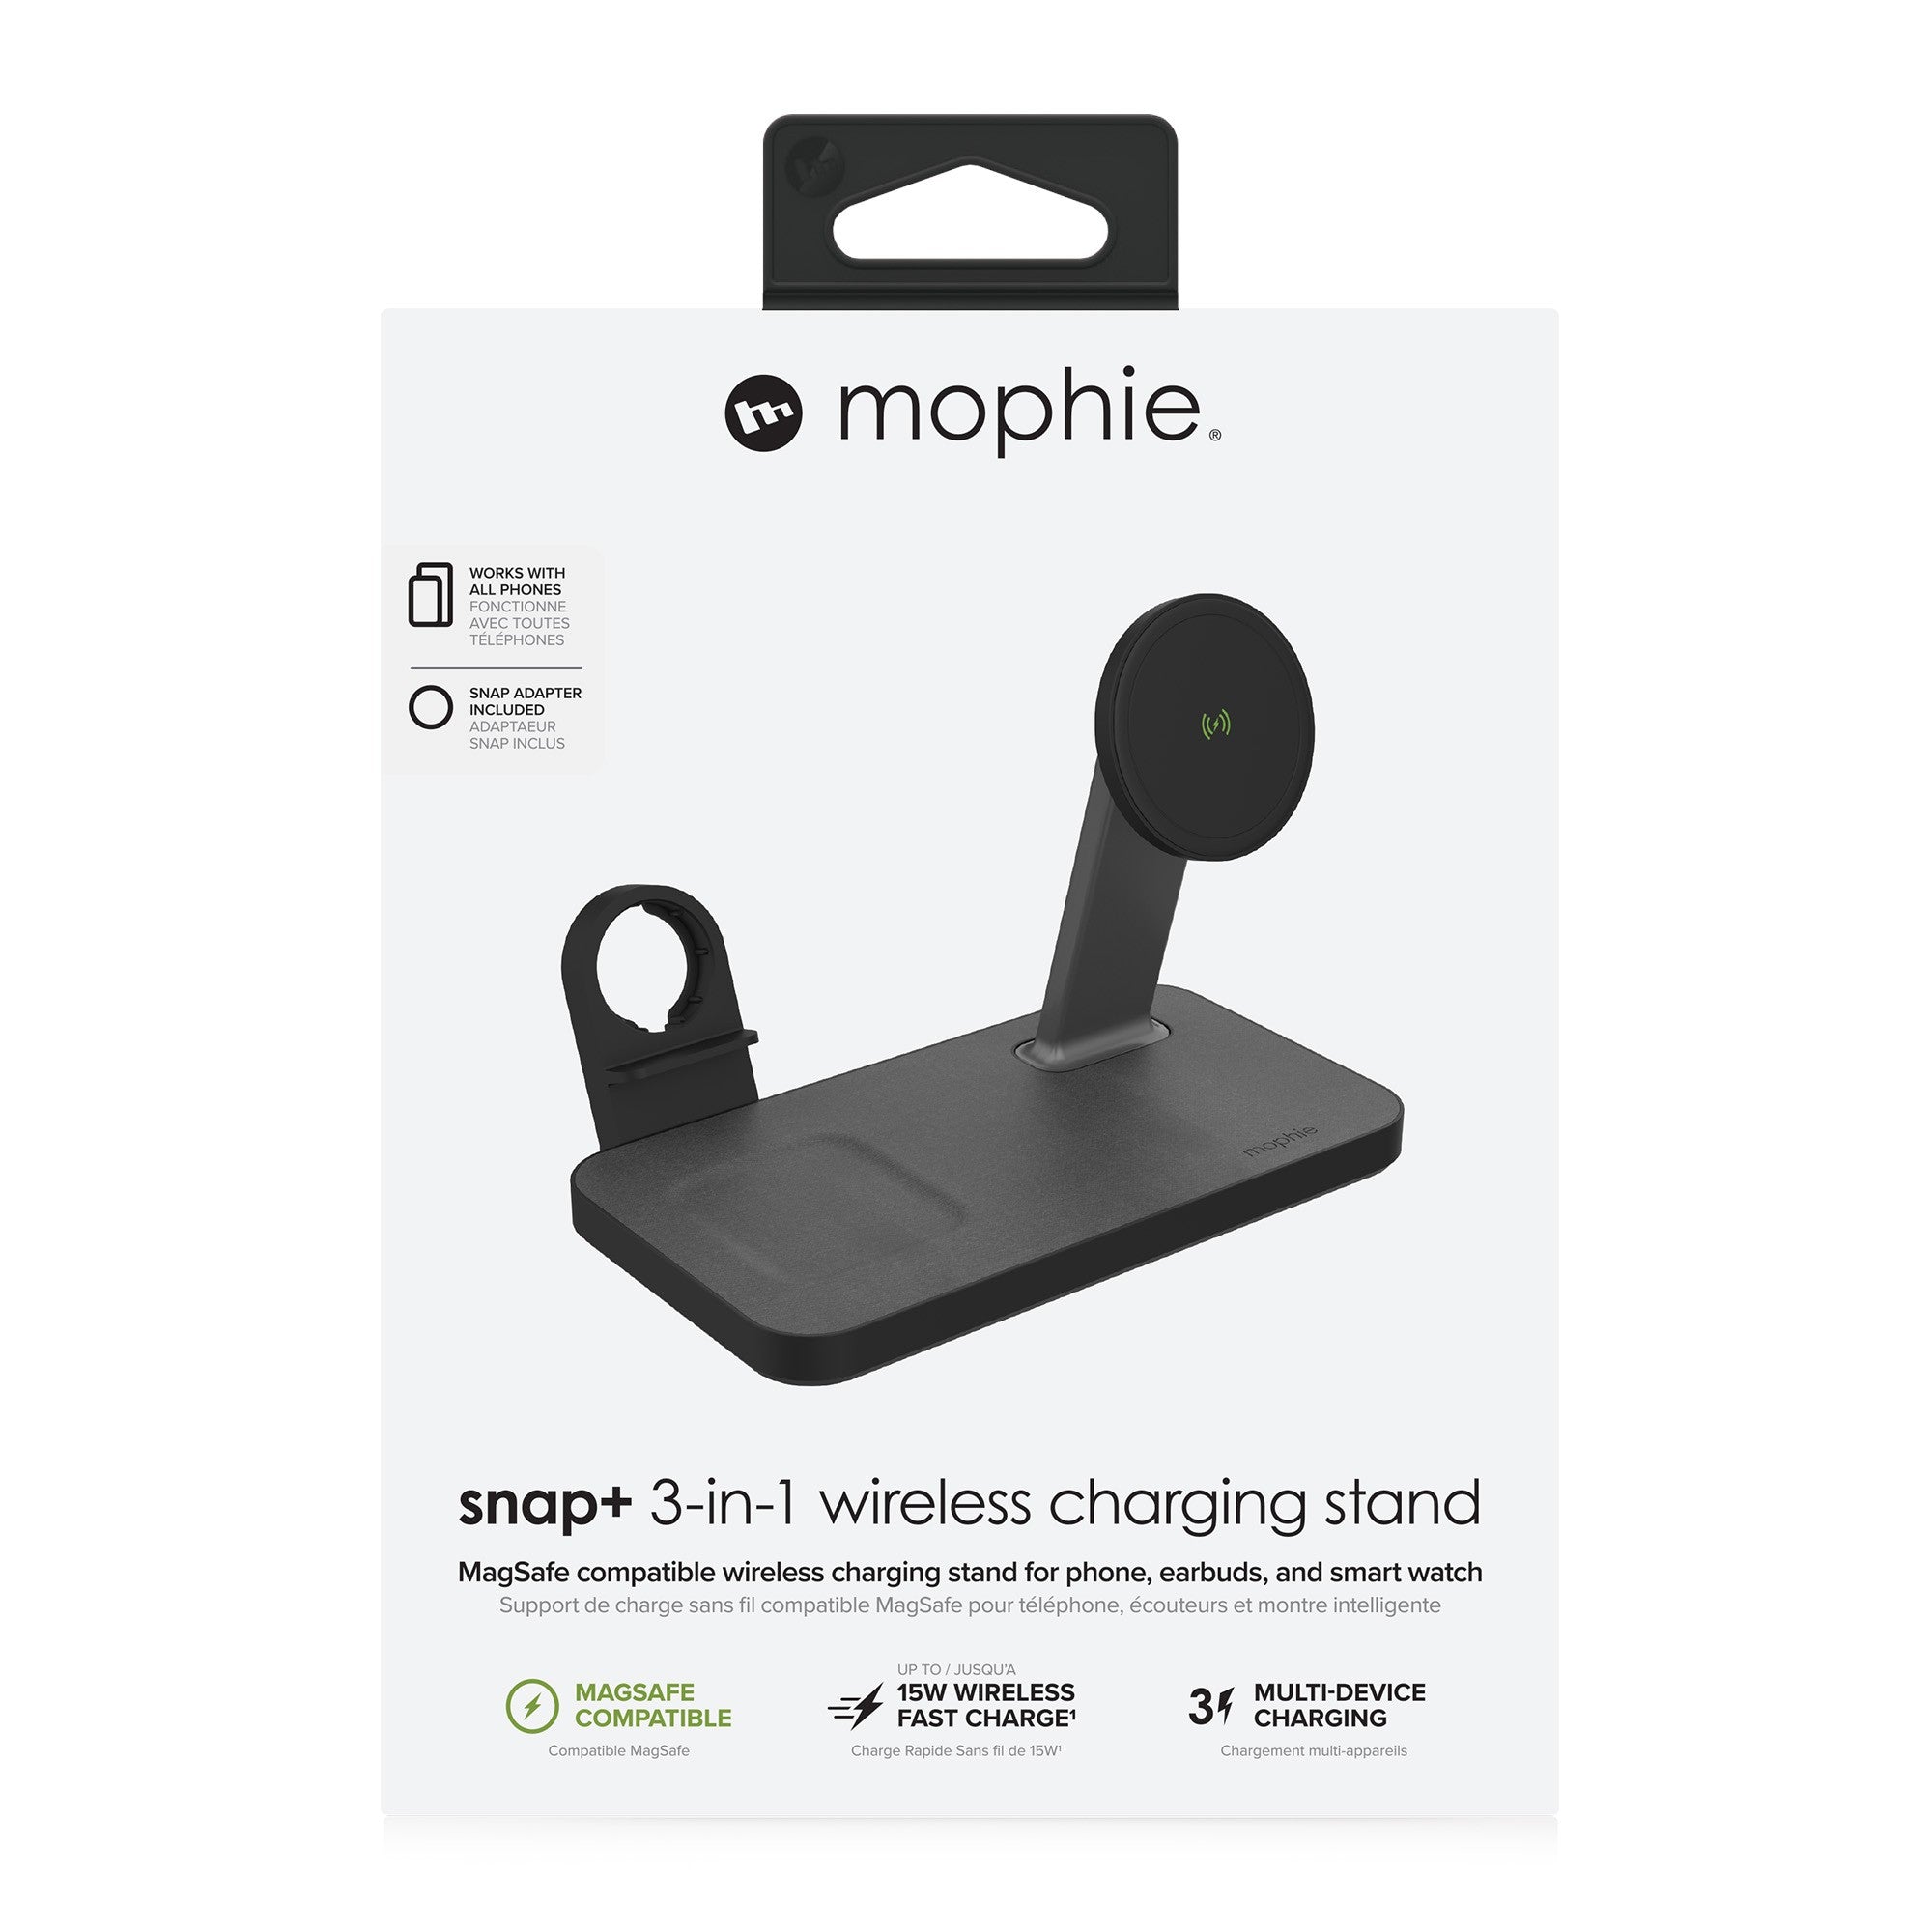 mophie universal snap+ 3-in-1 stand - 15-10726